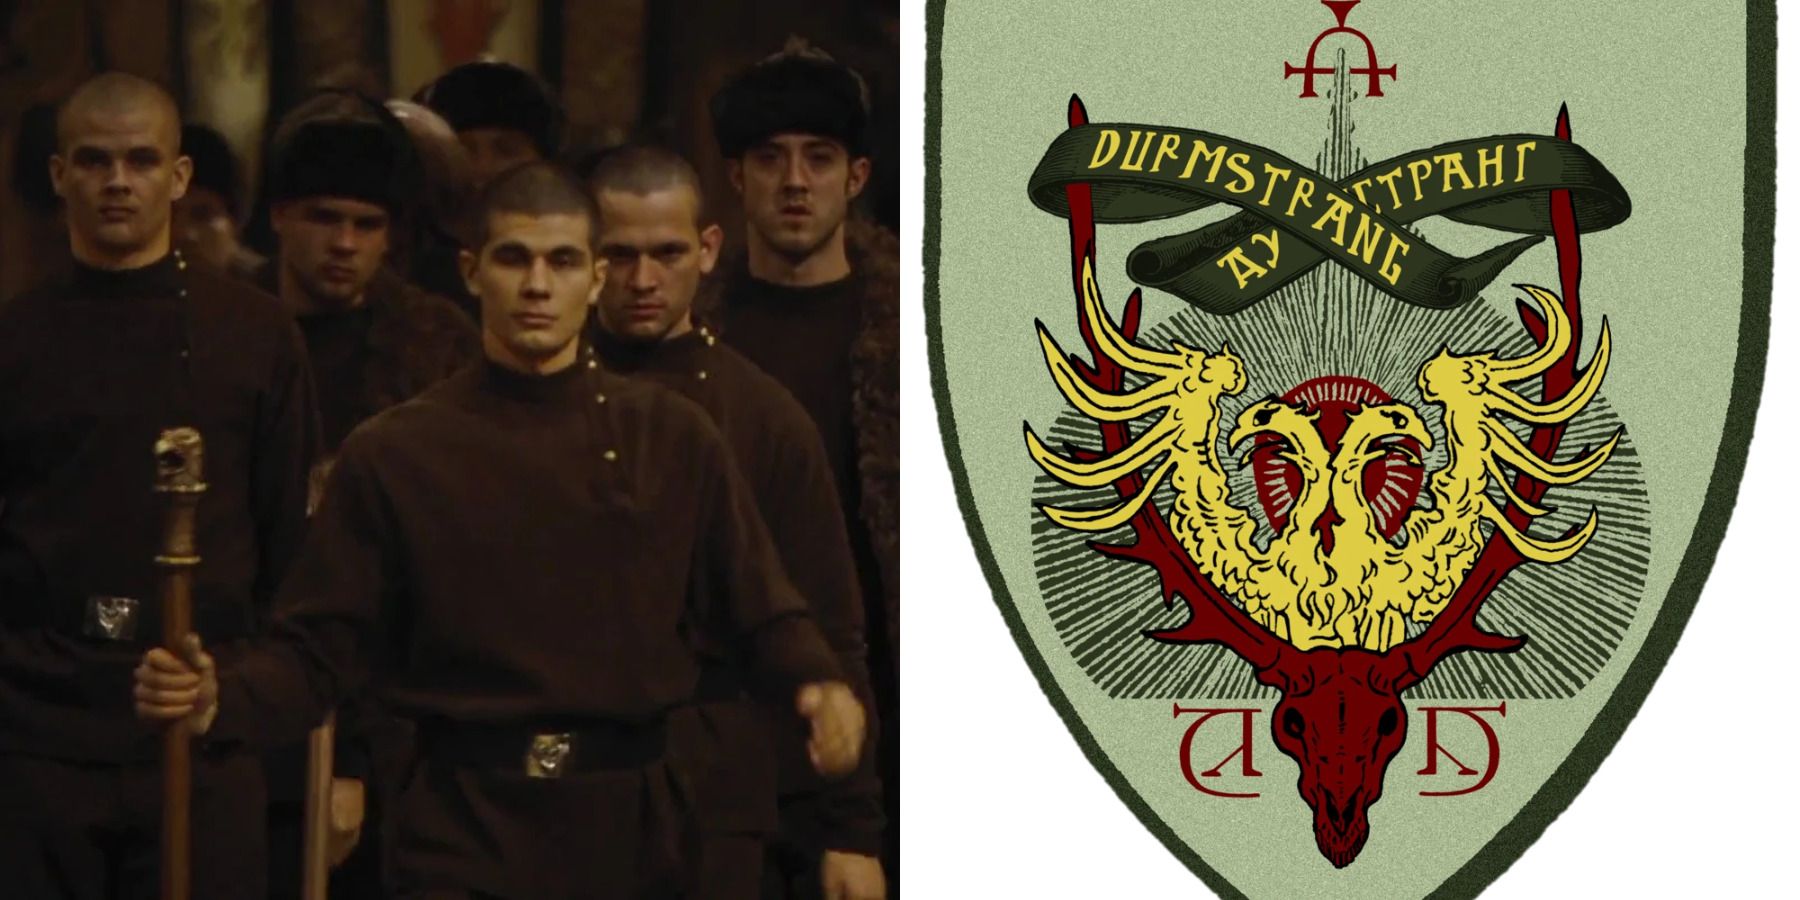 Harry Potter Durmstrang Facts Cover